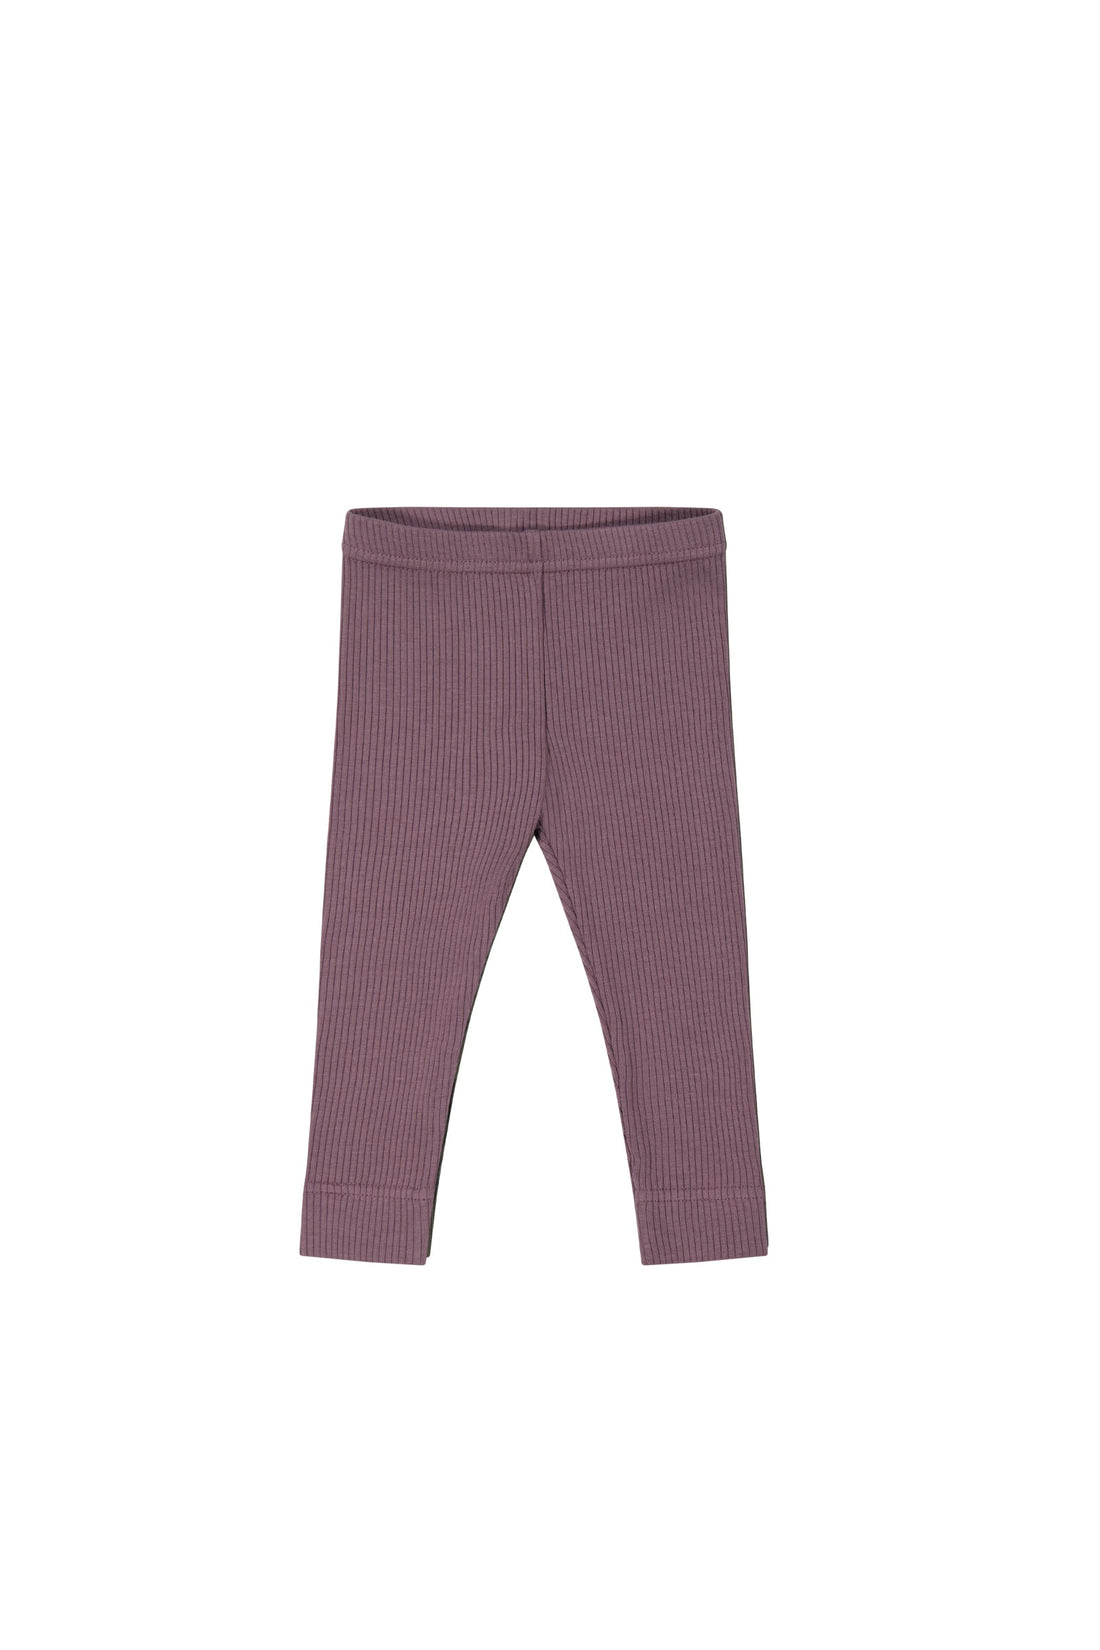 Gaiam Organic Ruched Legging Review - Gift Idea For Her